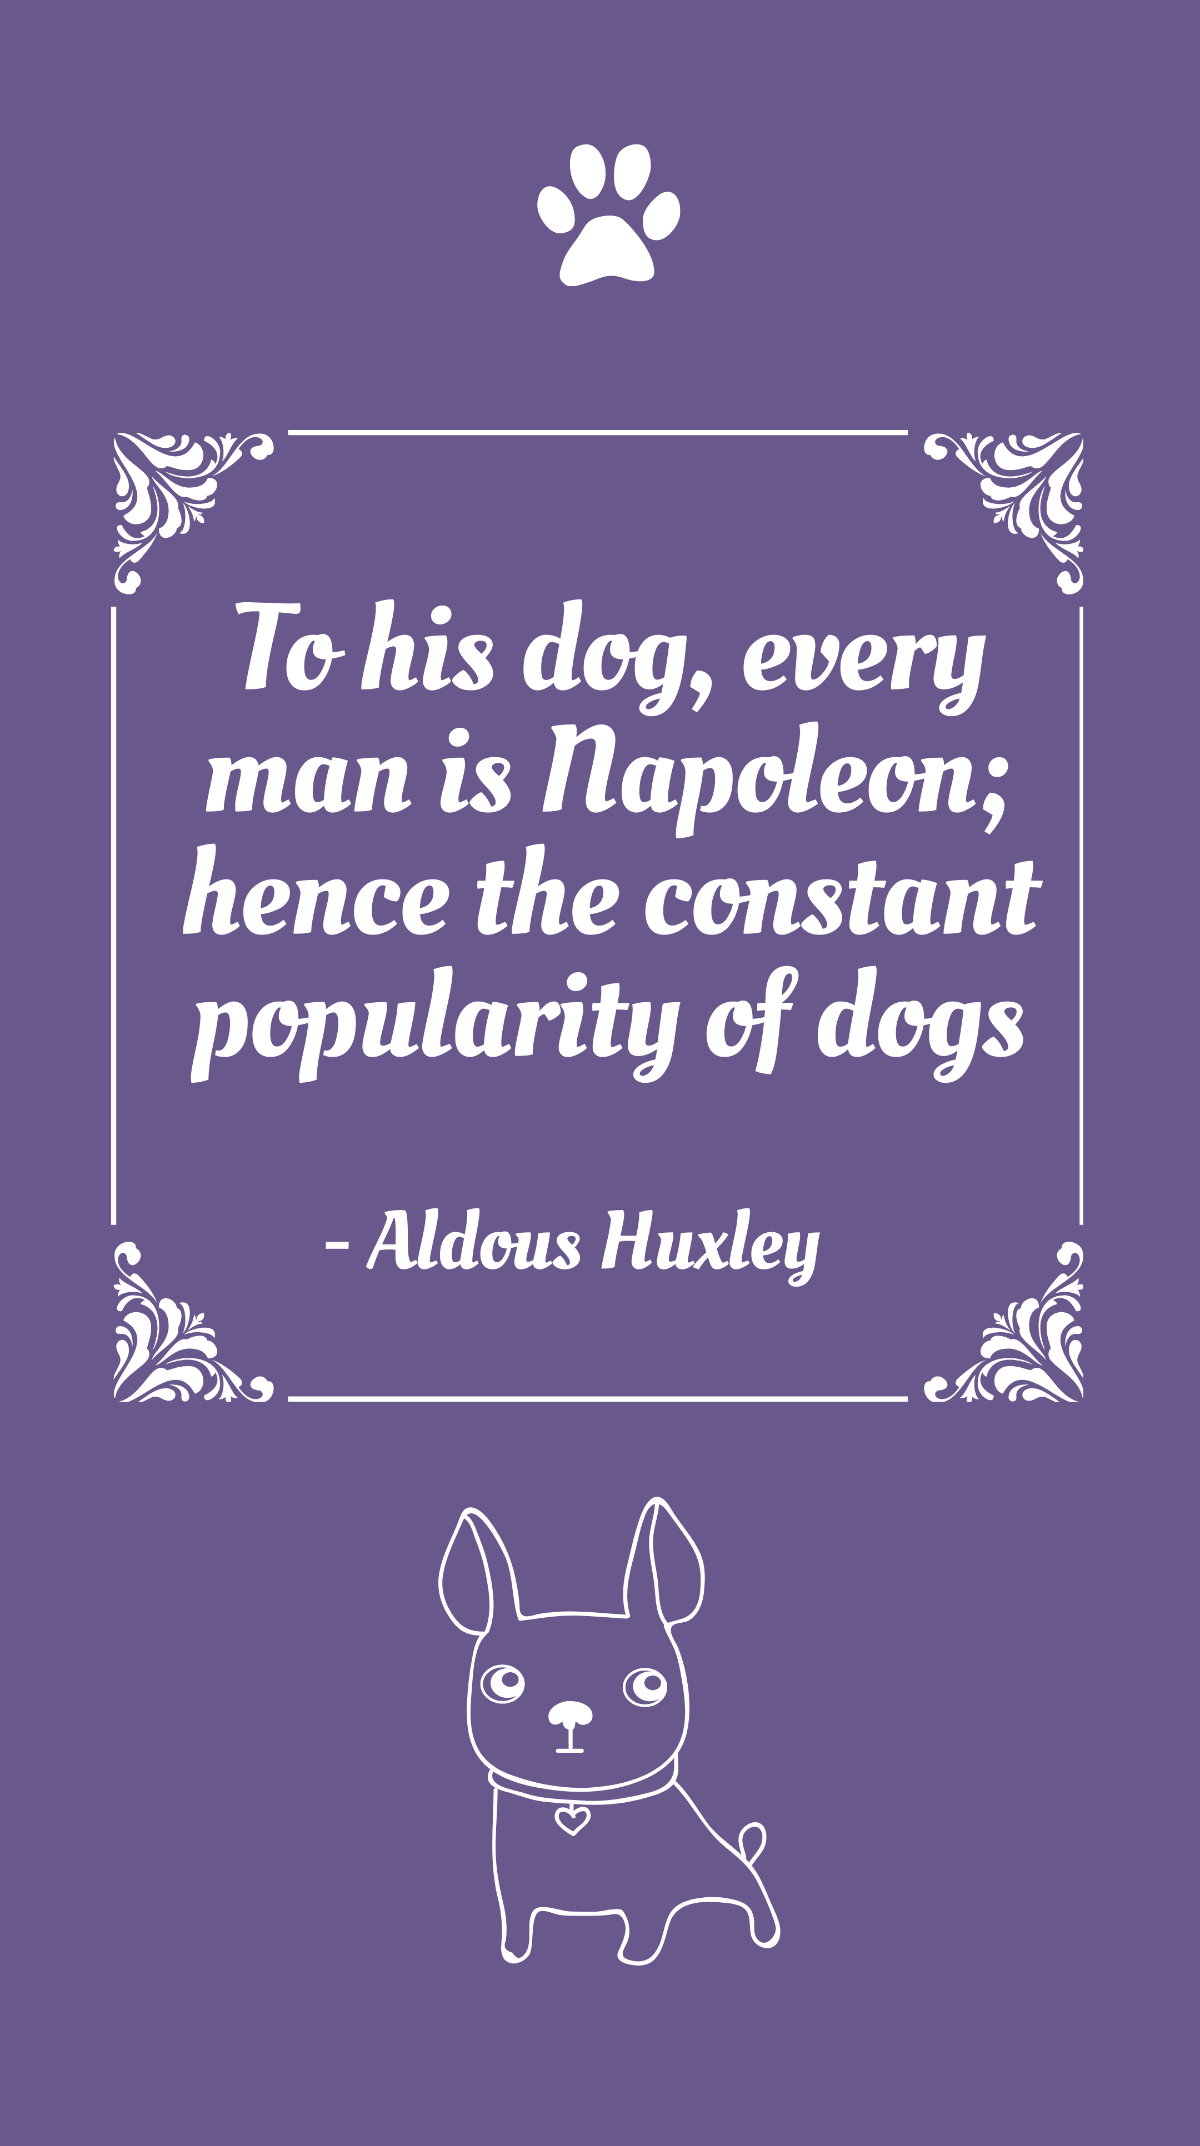 Aldous Huxley - To his dog, every man is Napoleon; hence the constant popularity of dogs